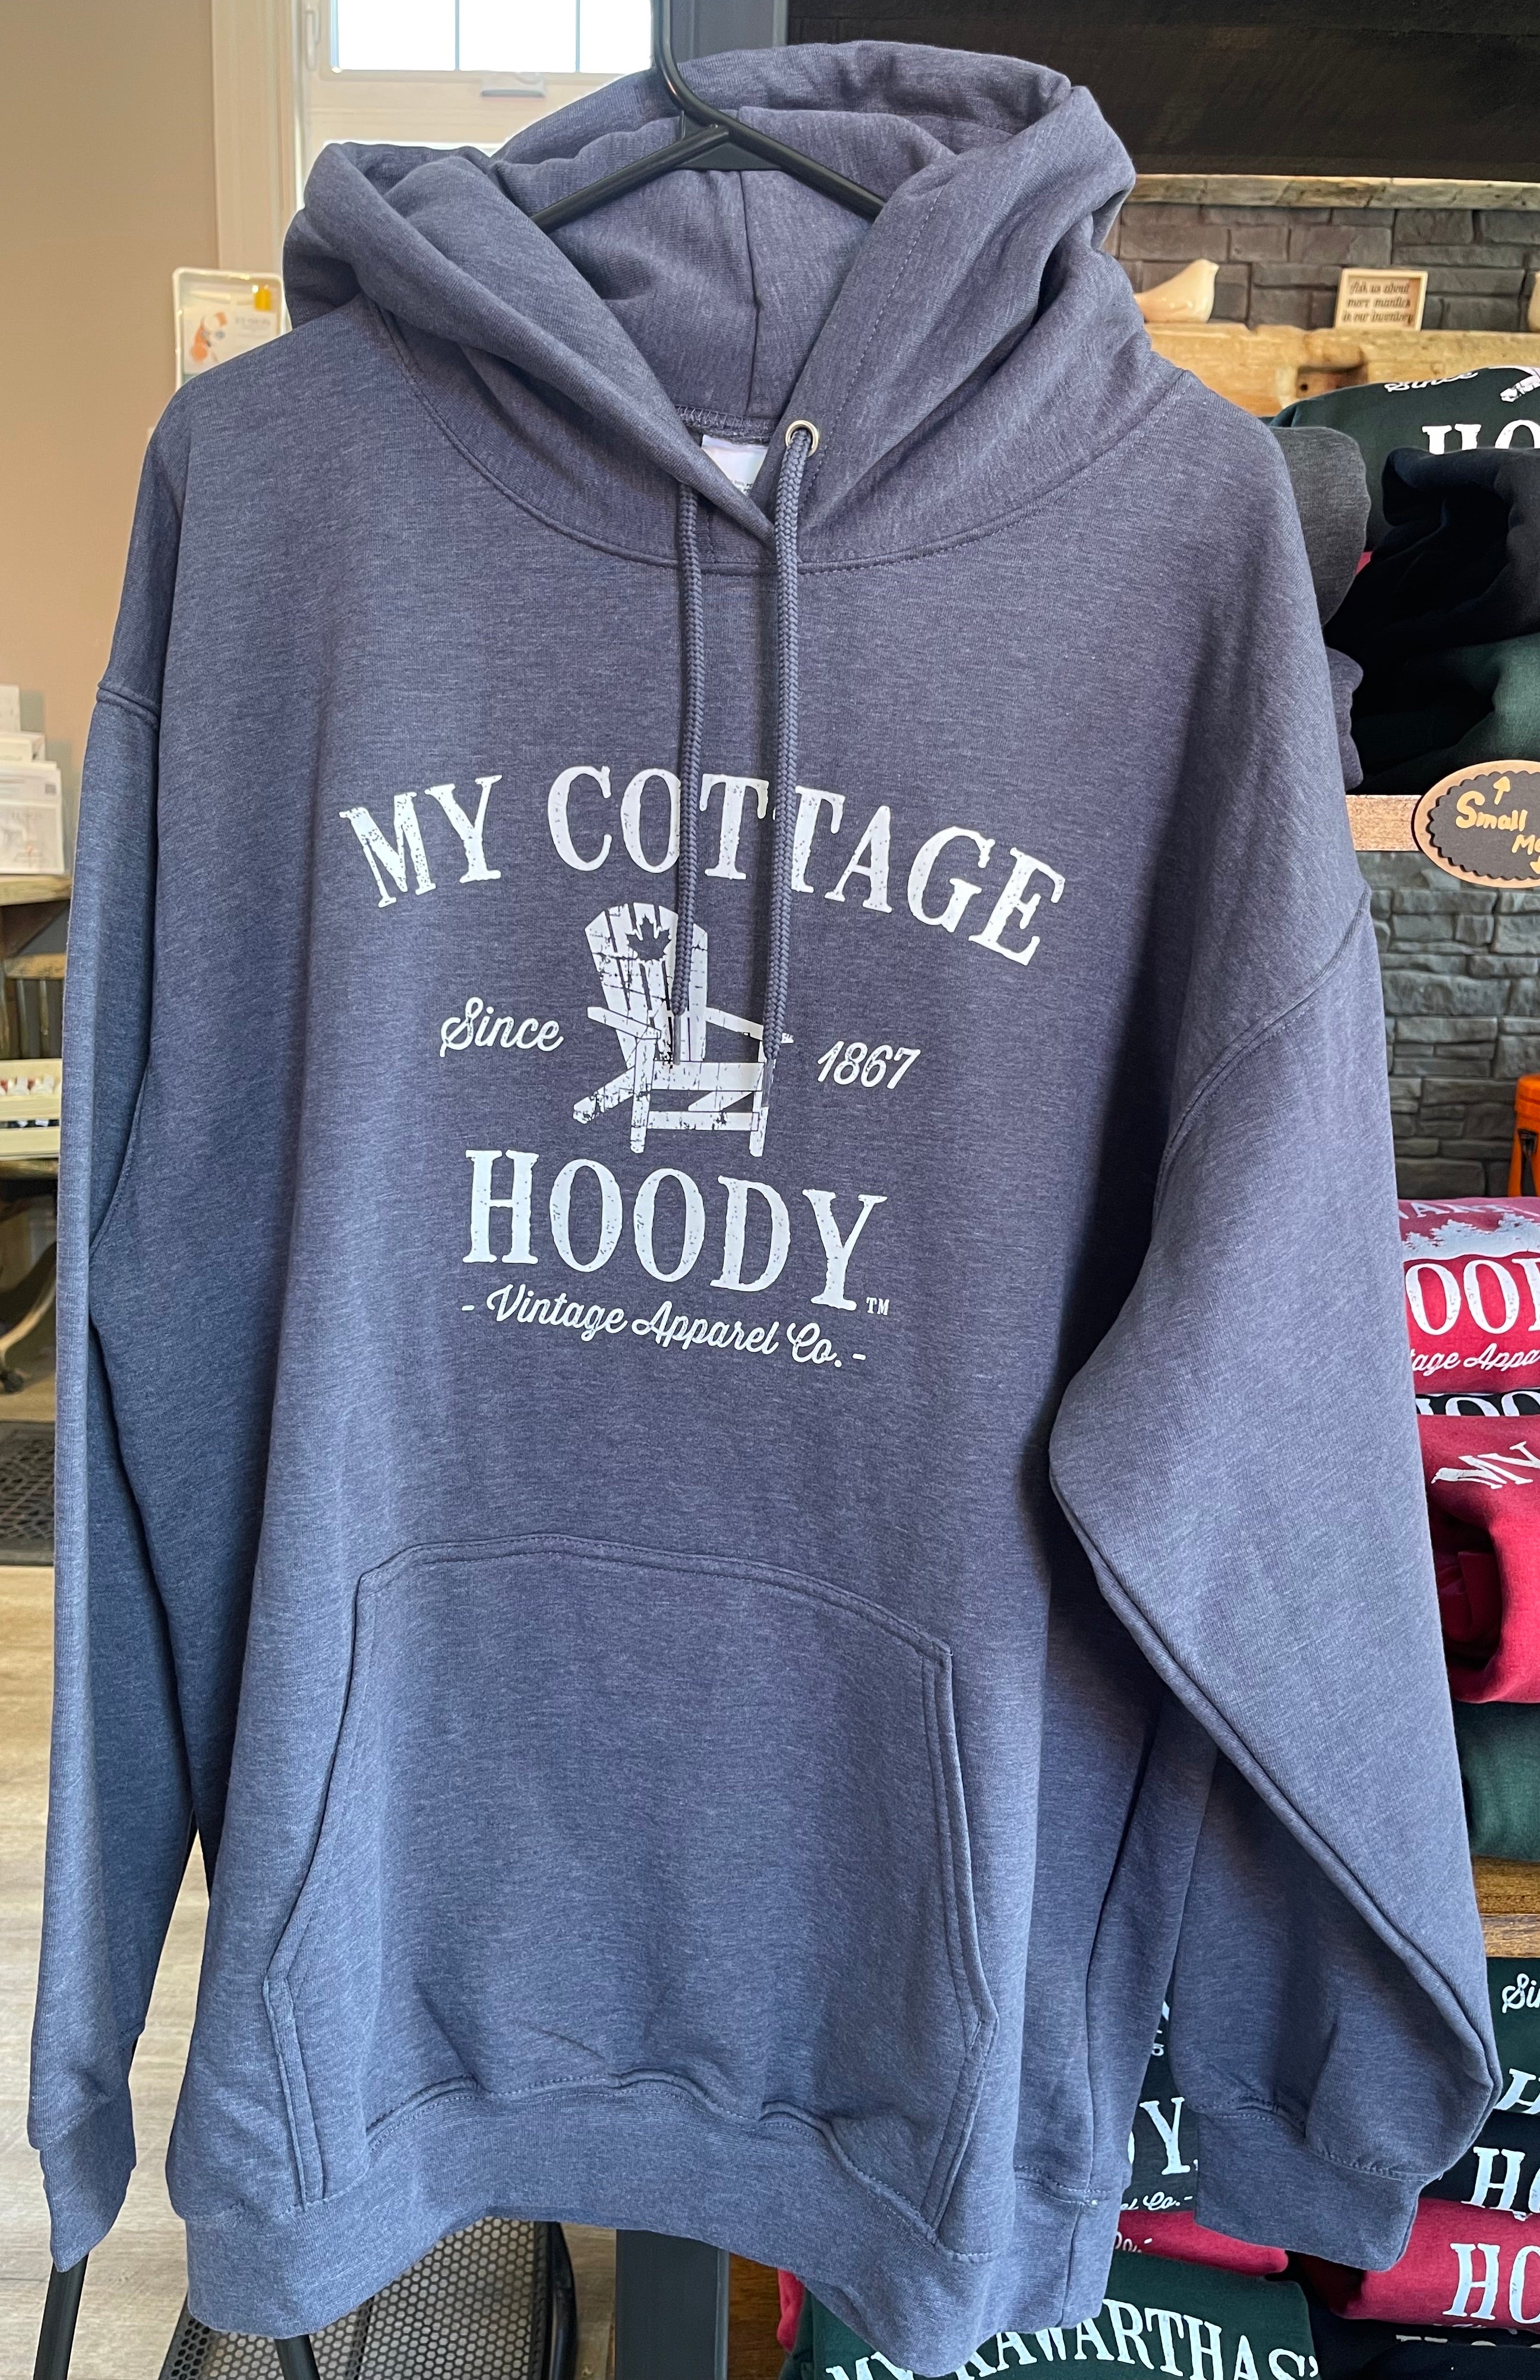 My Cottage Hoody